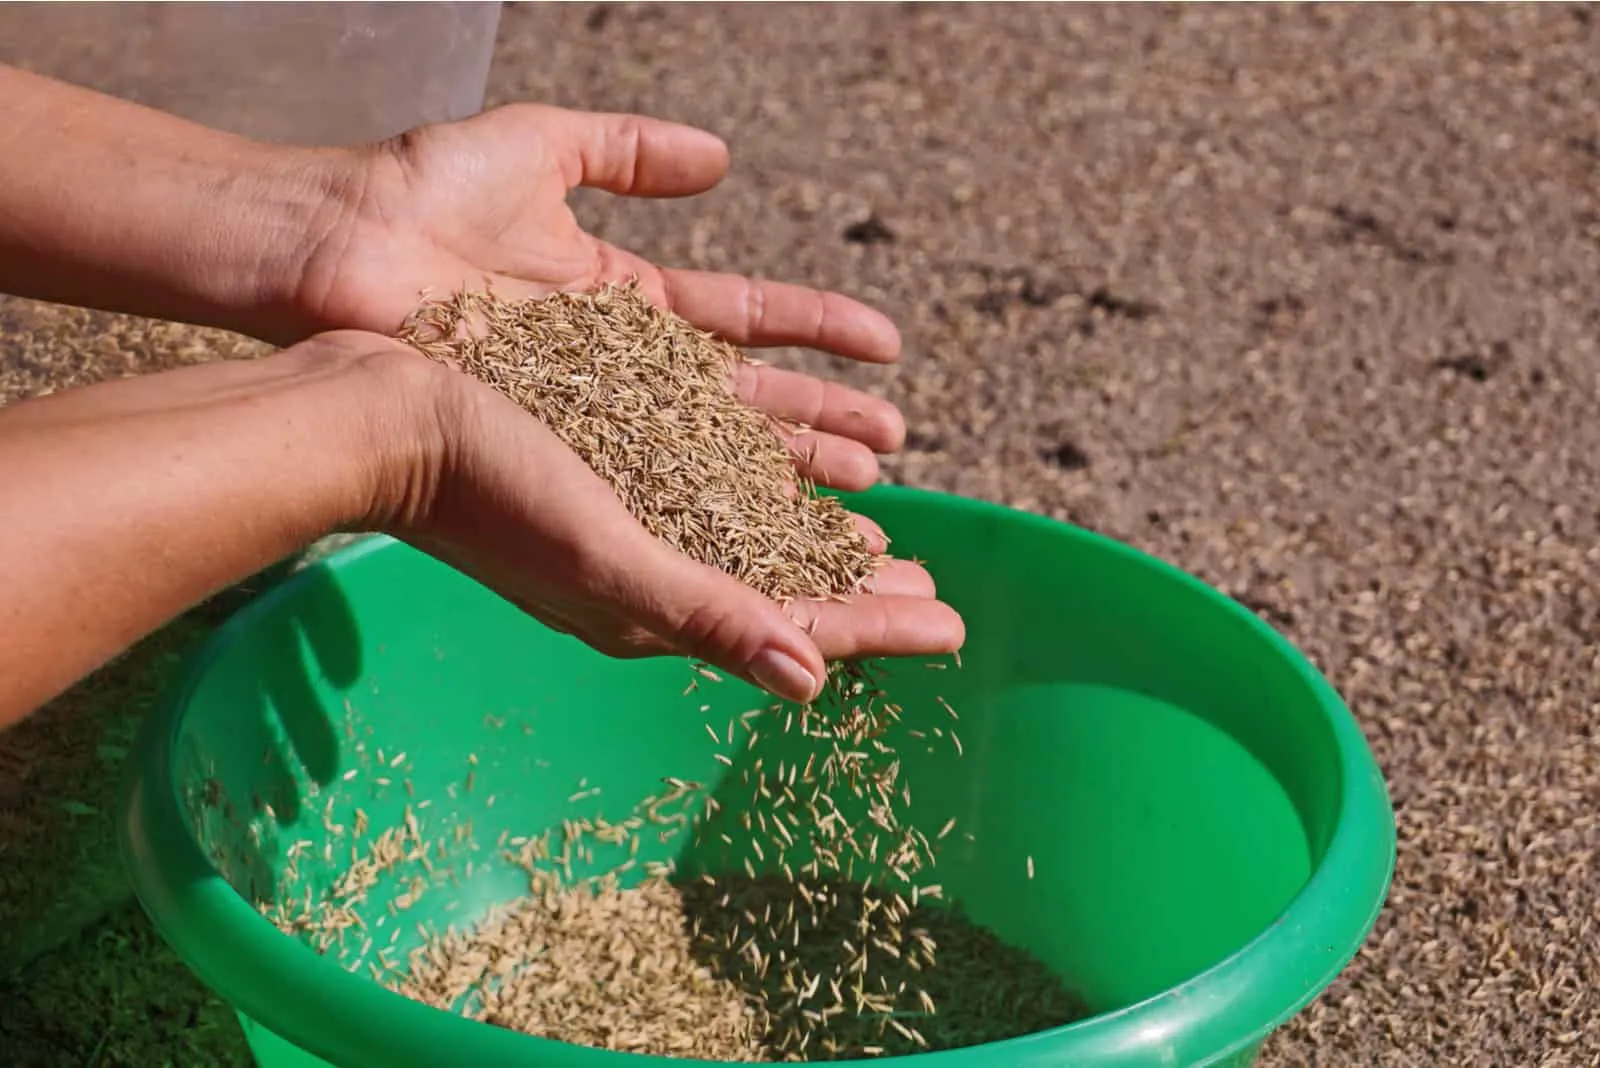 Pouring grass seeds from the packaging into the bowl